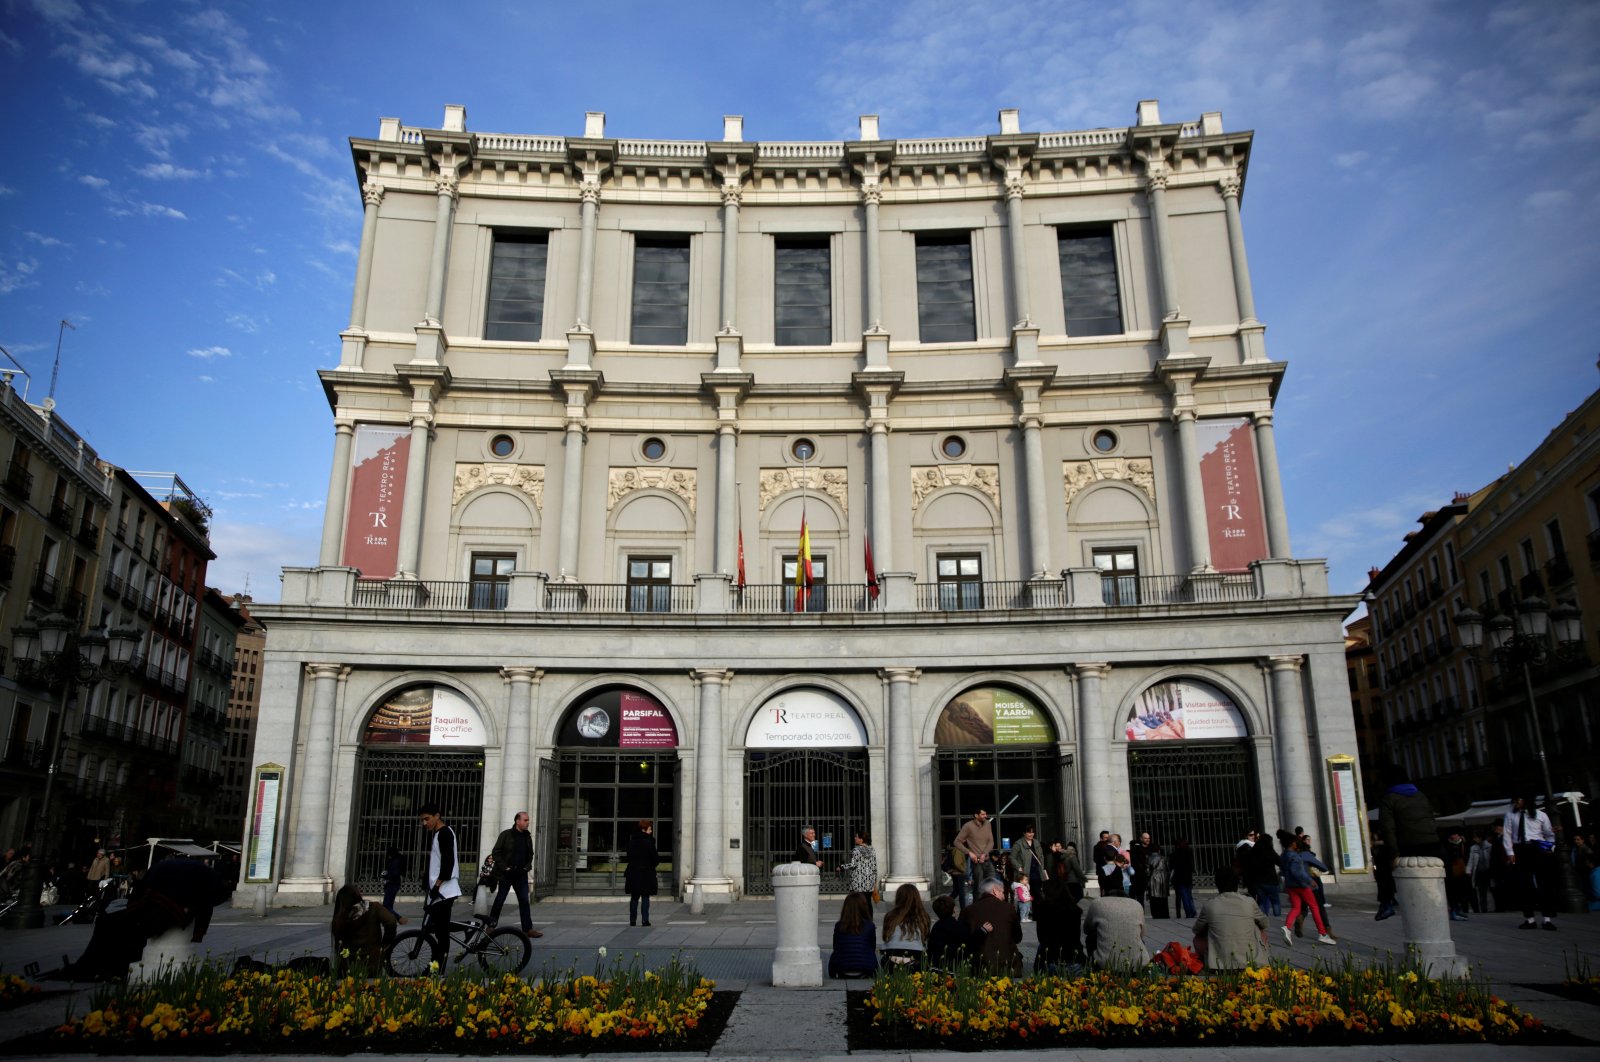 A general view shows the Teatro Real (Royal Theatre), a major opera house at Plaza de Oriente (Oriente square) in Madrid, Spain, March 25, 2016. (Reuters Photo)